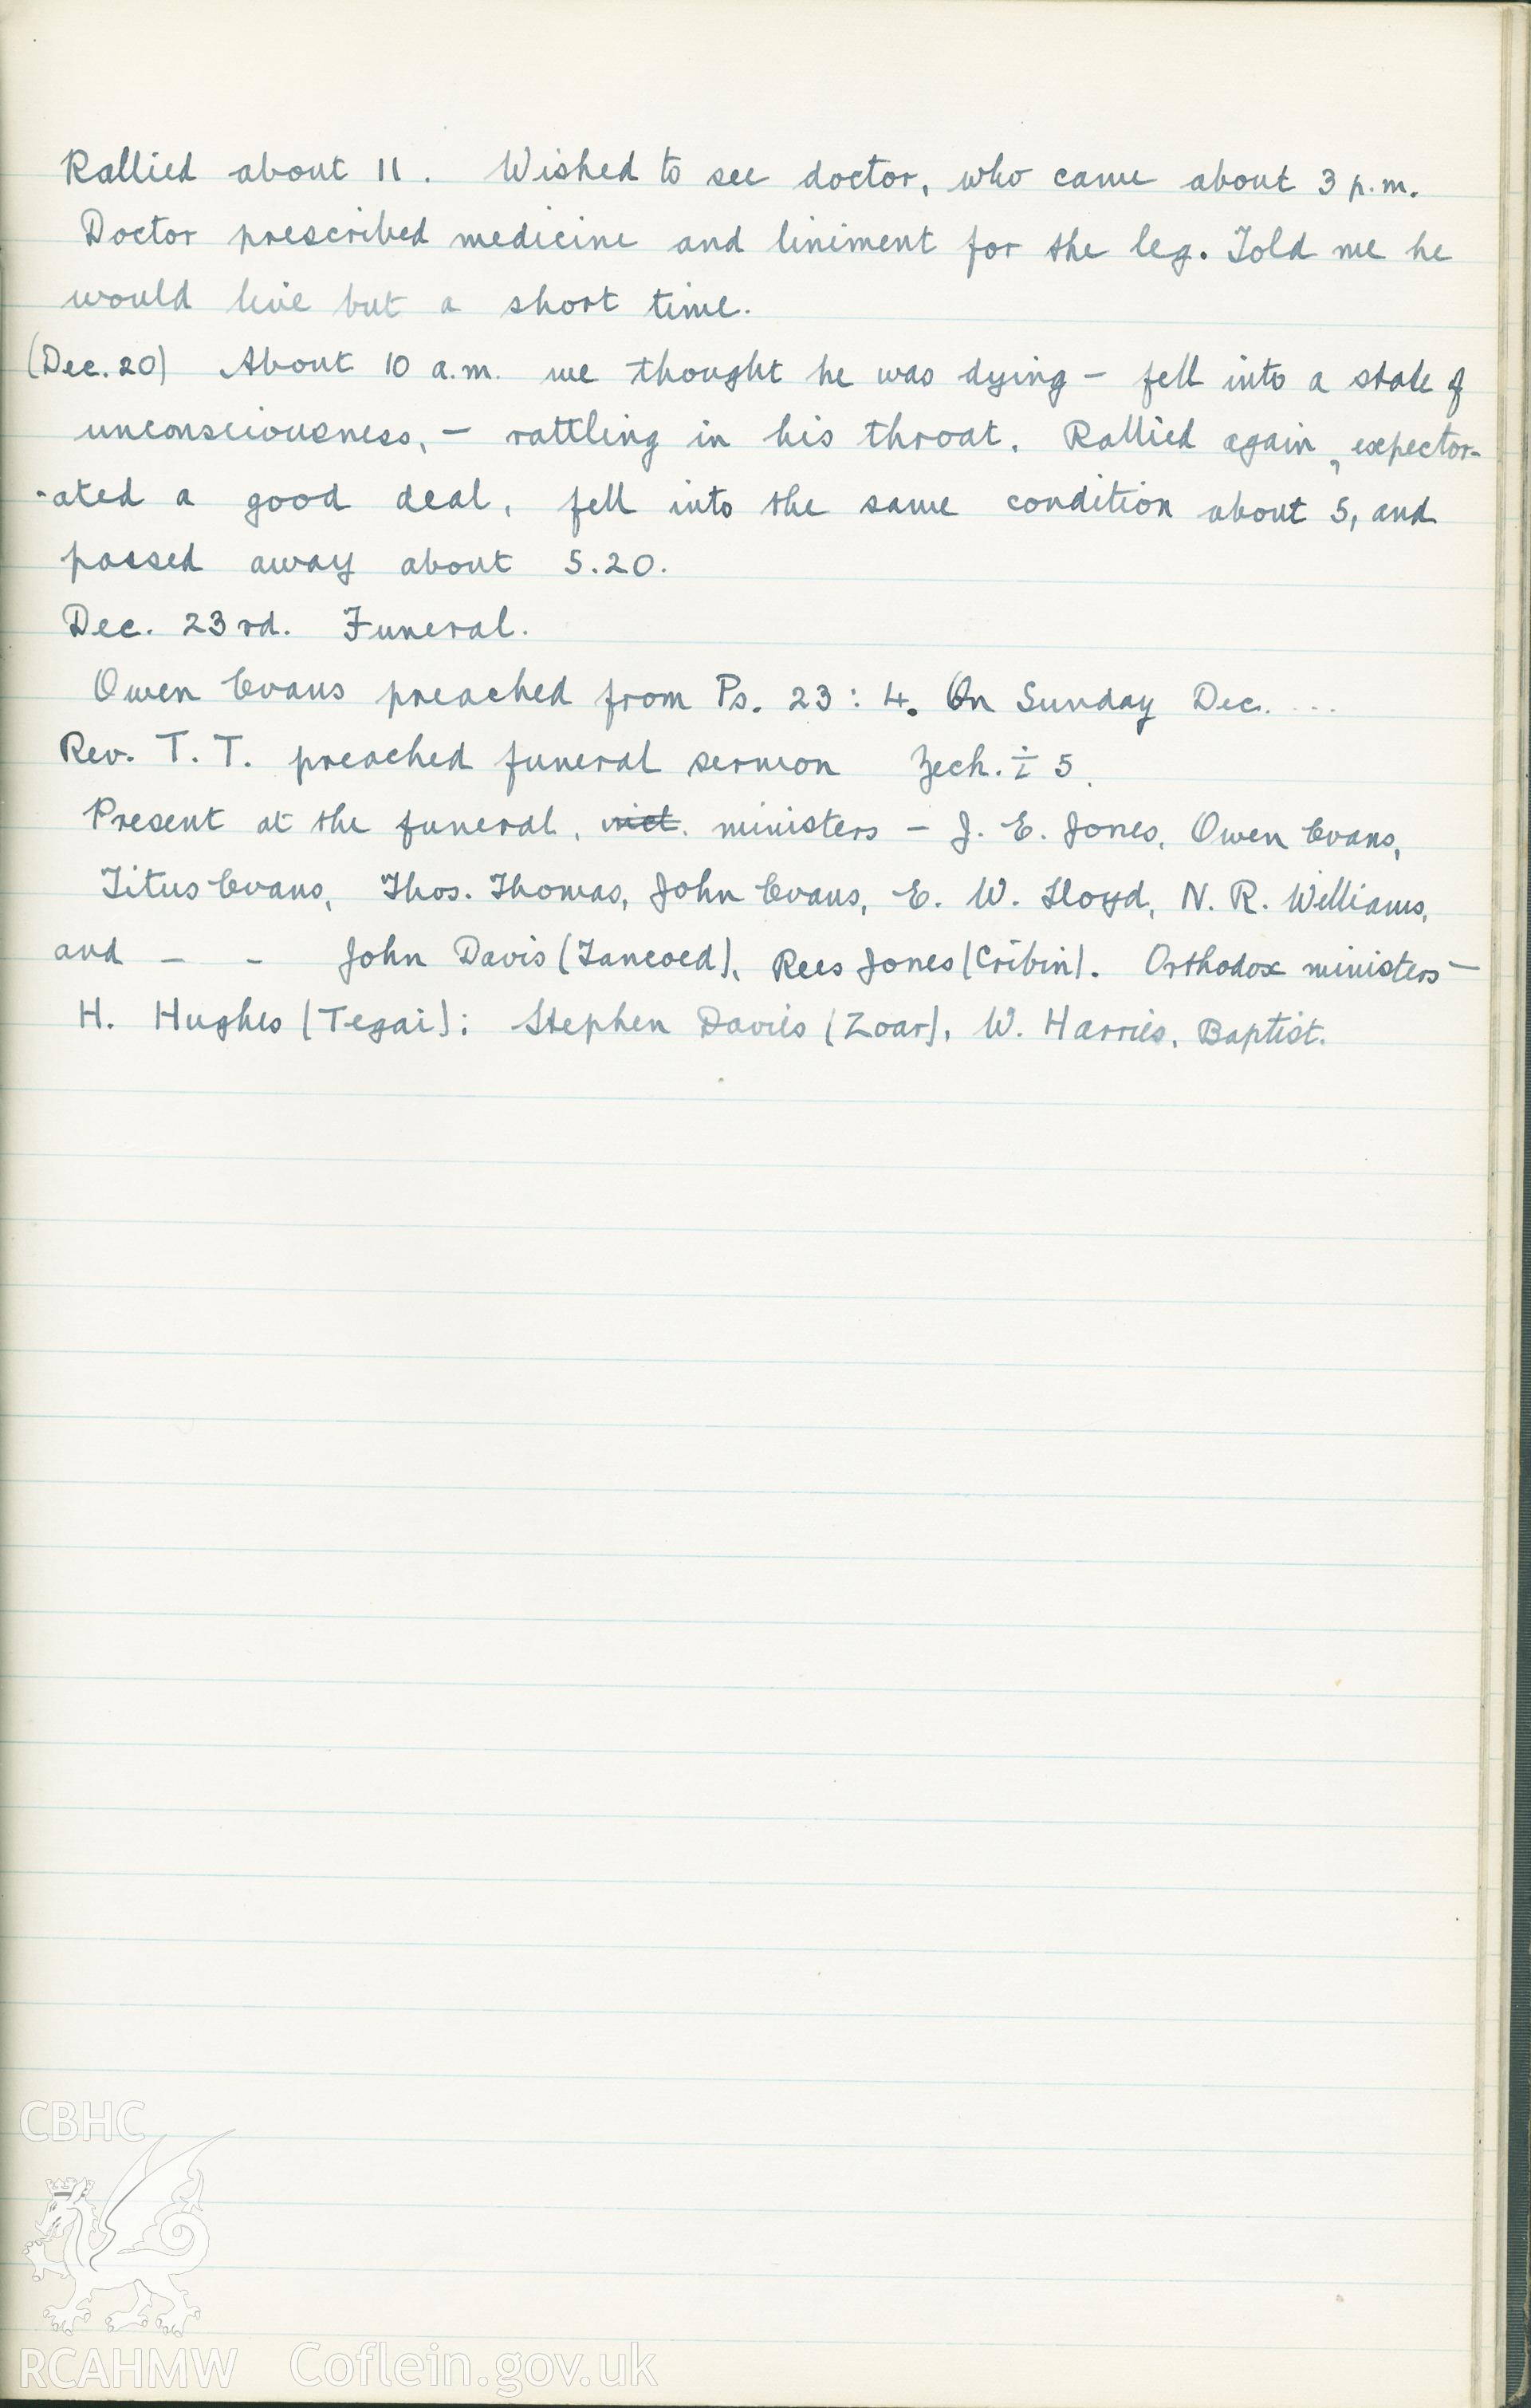 Account of the Rev. John Jones's death, written by his son the Rev. Rees Jenkin Jones and copied by W. W. Price, Penlan, Brynhyfryd, Aberdare, 27th April, 1941. Donated to the RCAHMW as part of the Digital Dissent Project.